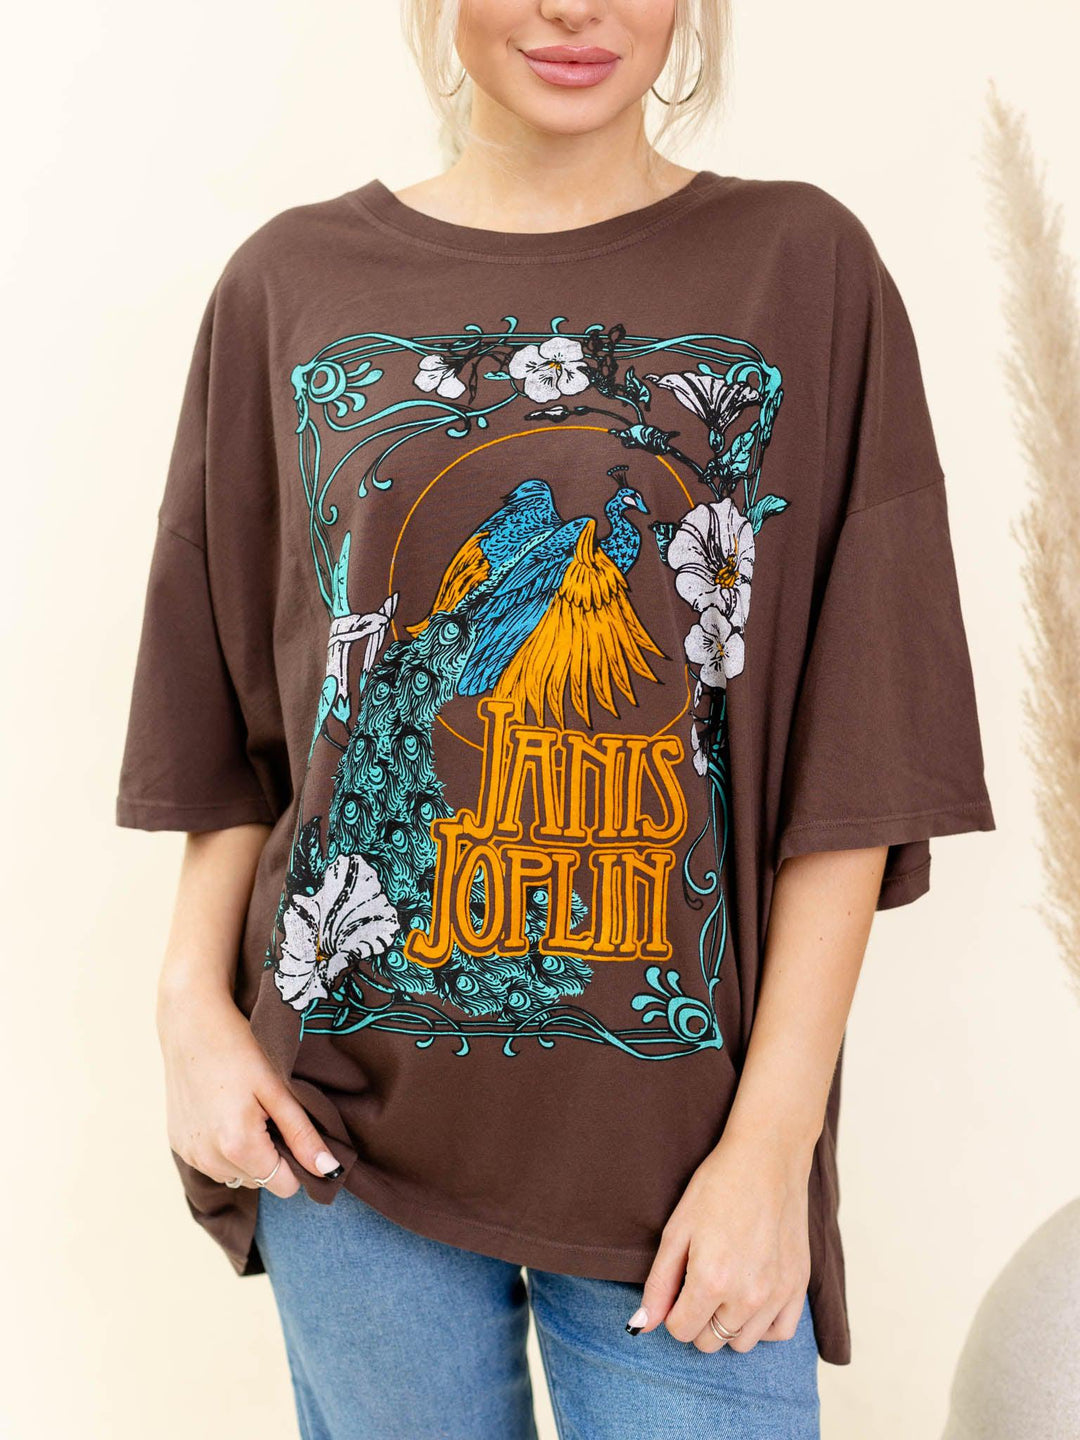 Daydreamer-Daydreamer Janis Joplin Floral Peacock One Size Tee - Leela and Lavender